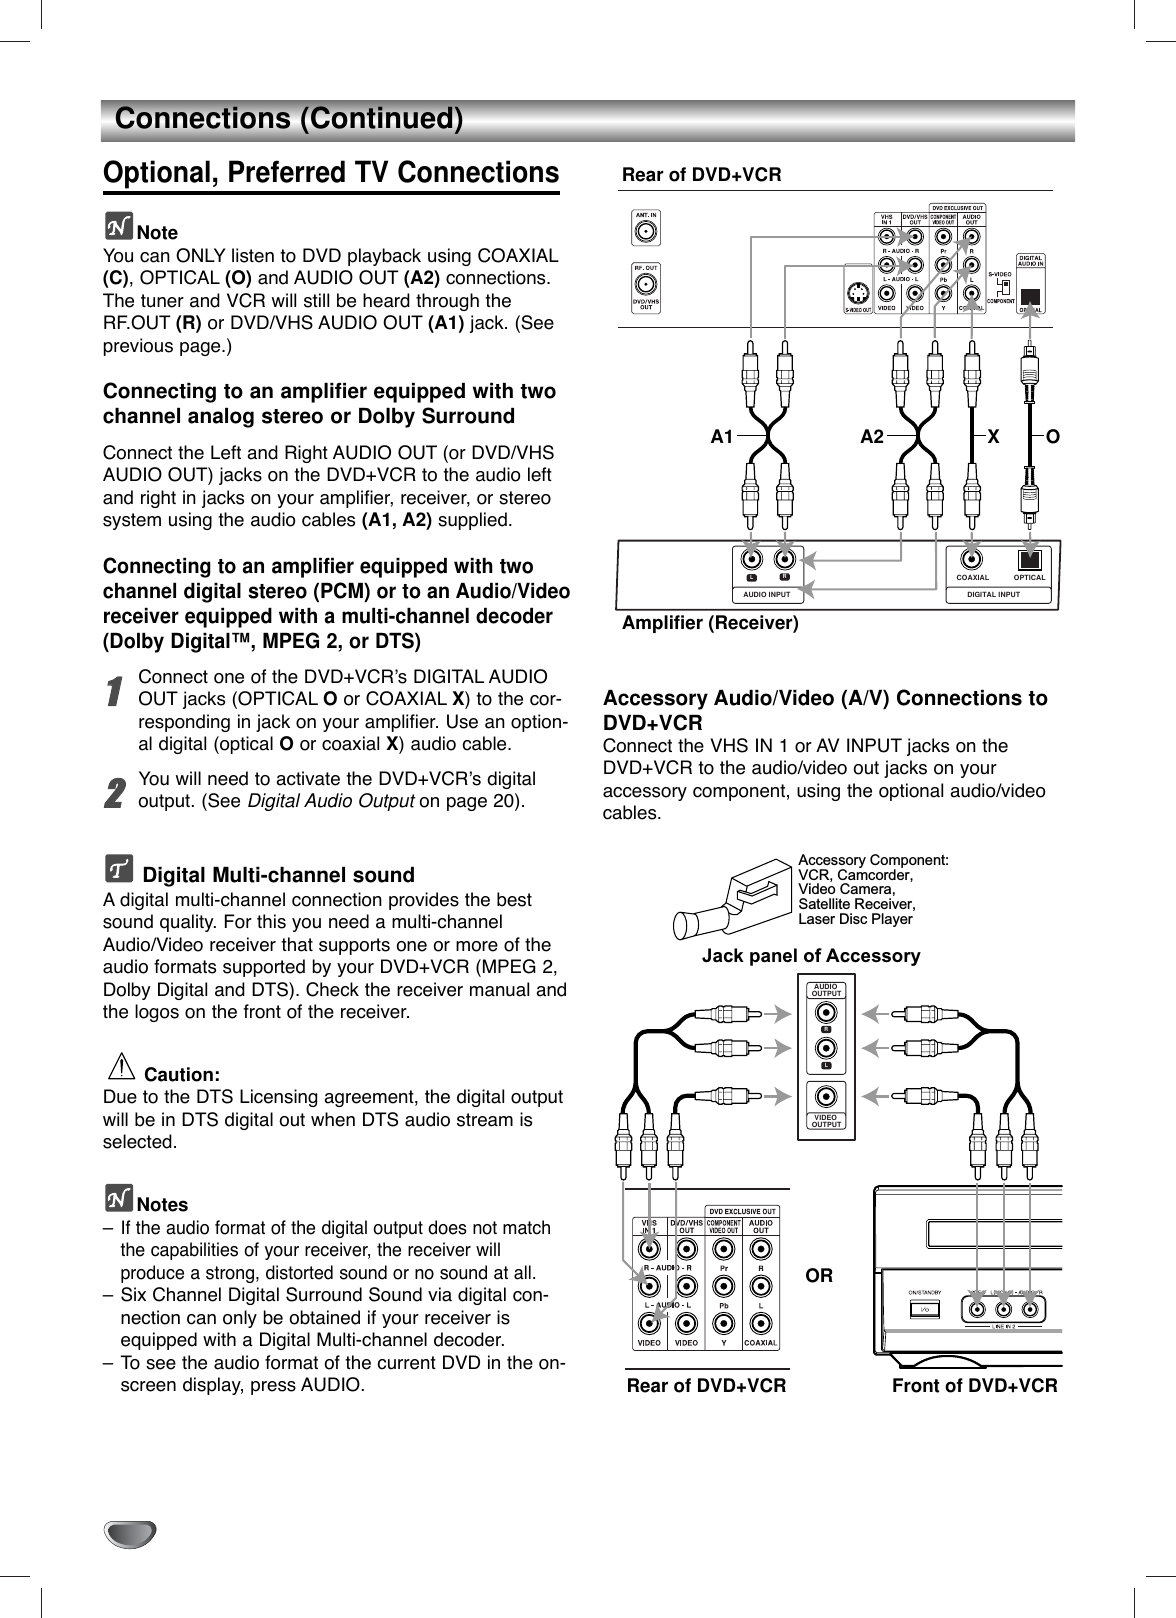 Connections (Continued)Optional, Preferred TV ConnectionsNoteYou can ONLY listen to DVD playback using COAXIAL(C),OPTICAL (O) and AUDIO OUT (A2) connections.The tuner and VCR will still be heard through theRF.OUT (R) or DVD/VHS AUDIO OUT (A1) jack. (Seeprevious page.)Connecting to an amplifier equipped with twochannel analog stereo or Dolby SurroundConnect the Left and Right AUDIO OUT (or DVD/VHSAUDIO OUT) jacks on the DVD+VCR to the audio leftand right in jacks on your amplifier, receiver, or stereosystem using the audio cables (A1, A2) supplied.Connecting to an amplifier equipped with twochannel digital stereo (PCM) or to an Audio/Videoreceiver equipped with a multi-channel decoder(Dolby Digital™, MPEG 2, or DTS)11Connect one of the DVD+VCR’s DIGITAL AUDIOOUT jacks (OPTICAL Oor COAXIAL X) to the cor-responding in jack on your amplifier. Use an option-al digital (optical Oor coaxial X) audio cable.22You will need to activate the DVD+VCR’s digitaloutput. (See Digital Audio Output on page 20).Digital Multi-channel soundAdigital multi-channel connection provides the bestsound quality. For this you need a multi-channelAudio/Video receiver that supports one or more of theaudio formats supported by your DVD+VCR (MPEG 2,Dolby Digital and DTS). Check the receiver manual andthe logos on the front of the receiver.Caution:Due to the DTS Licensing agreement, the digital outputwill be in DTS digital out when DTS audio stream isselected.Notes–If the audio format of the digital output does not matchthe capabilities of your receiver, the receiver will produce a strong, distorted sound or no sound at all. –Six Channel Digital Surround Sound via digital con-nection can only be obtained if your receiver isequipped with a Digital Multi-channel decoder. –To see the audio format of the current DVD in the on-screen display, press AUDIO.Accessory Audio/Video (A/V) Connections toDVD+VCRConnect the VHS IN 1 or AV INPUT jacks on theDVD+VCR to the audio/video out jacks on your accessory component, using the optional audio/videocables.LRAUDIO INPUT DIGITAL INPUTOPTICALCOAXIALRear of DVD+VCRAmplifier (Receiver)A2A1 X OAccessory Component:VCR, Camcorder, Video Camera,Satellite Receiver,Laser Disc PlayerLRVIDEO OUTPUTAUDIO OUTPUTJack panel of AccessoryRear of DVD+VCR Front of DVD+VCROR